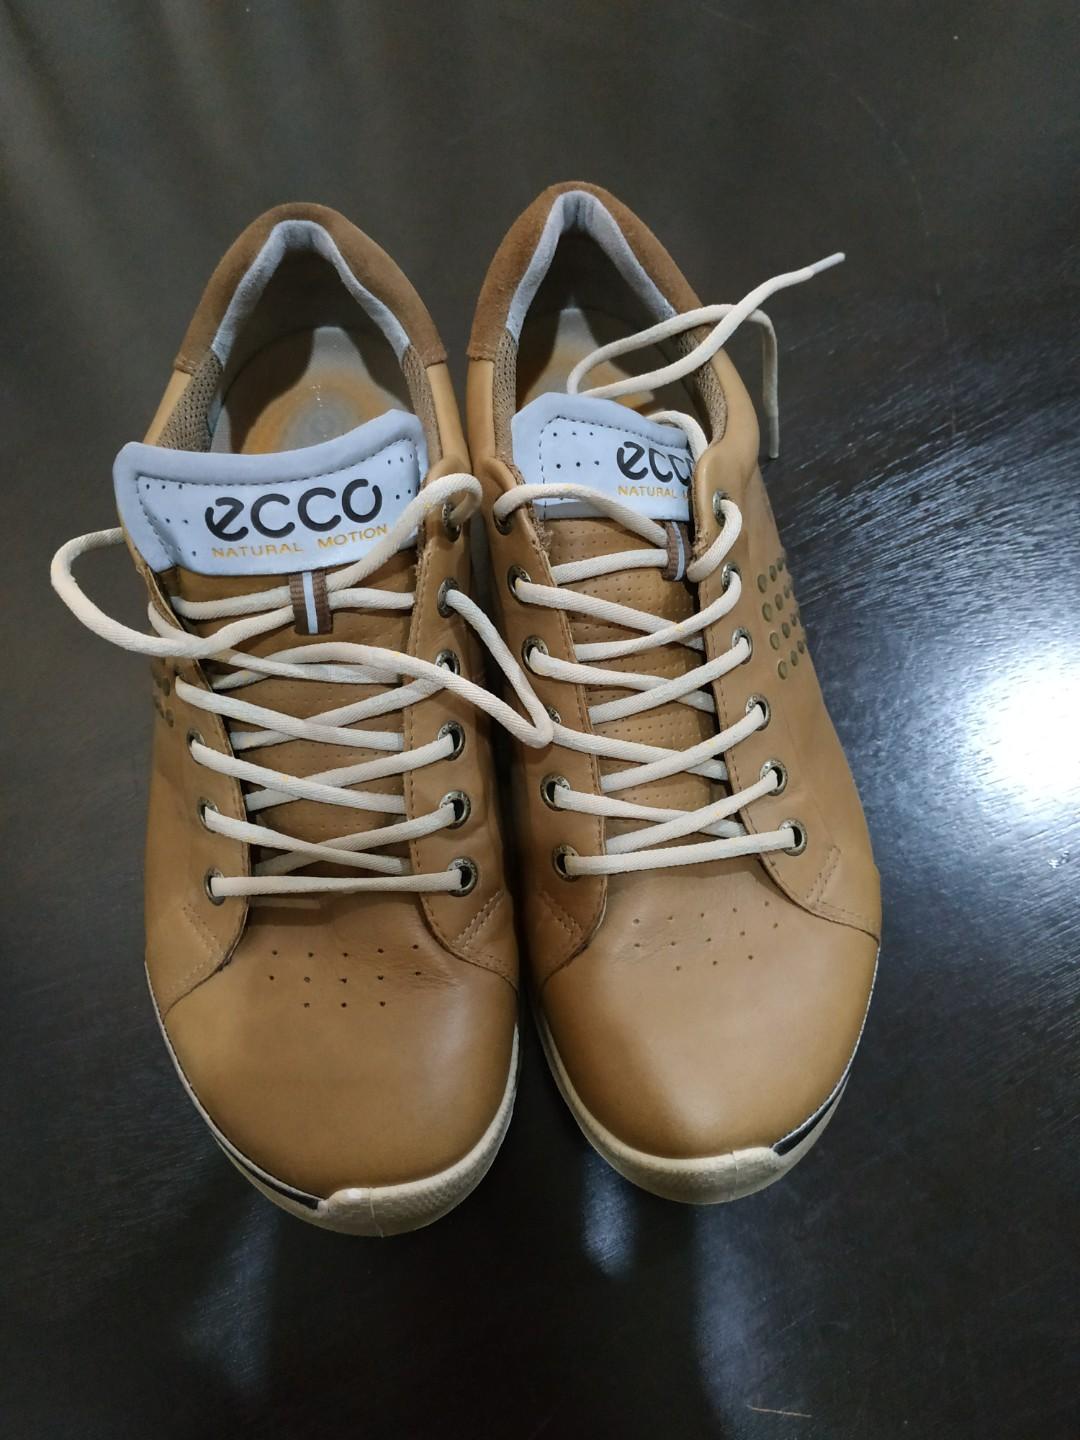 ecco golf shoes indonesia